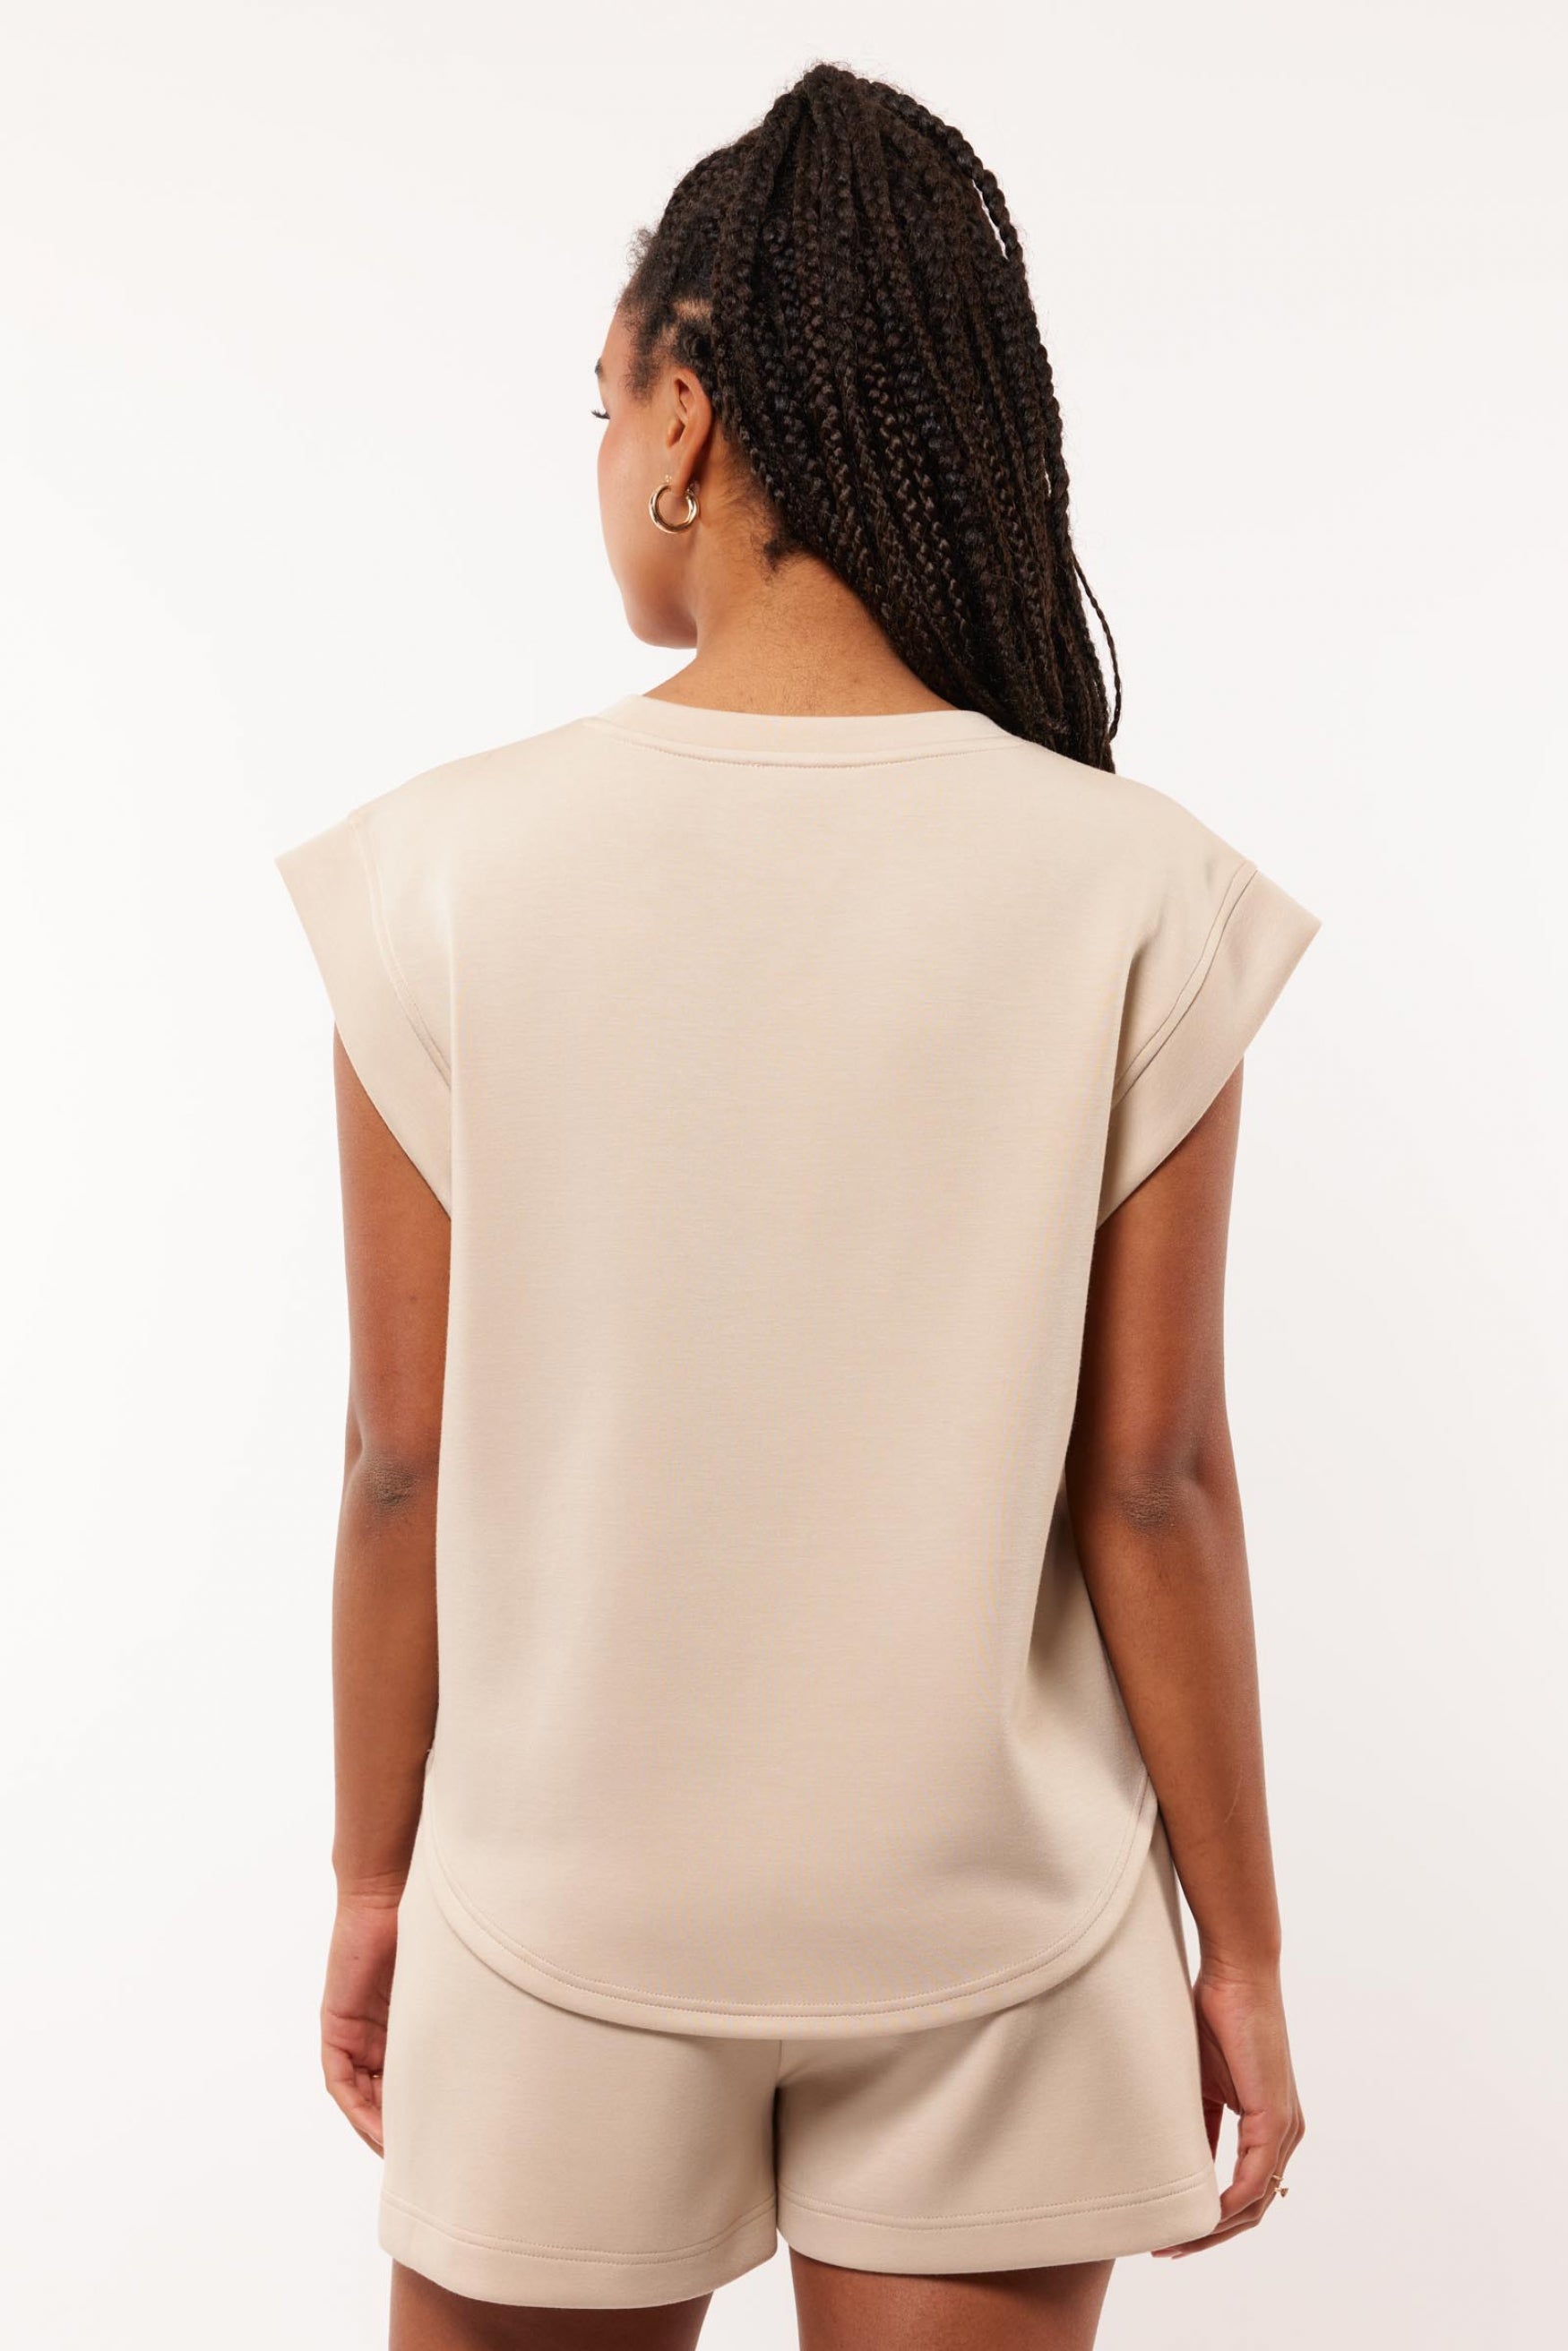 Lucile top | Sand